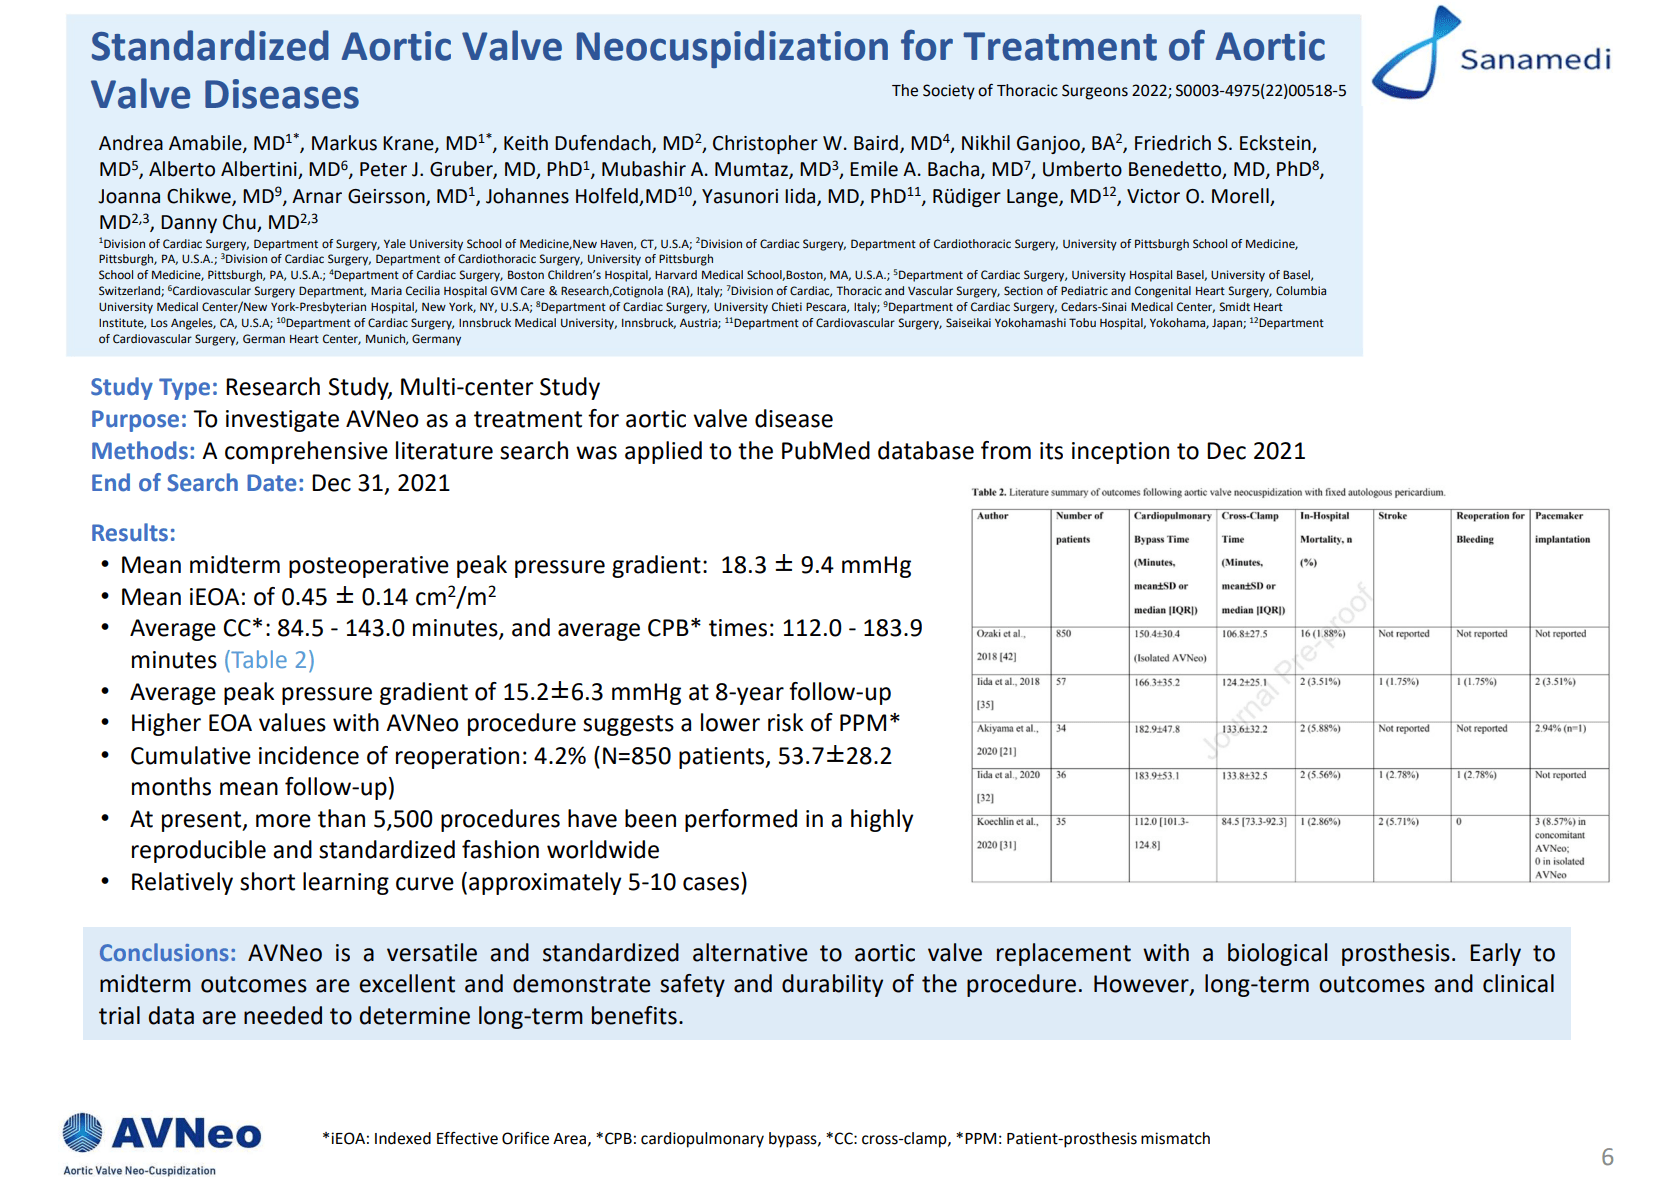 Summary of publication about using AVNeo procedure for aortic valve diseases